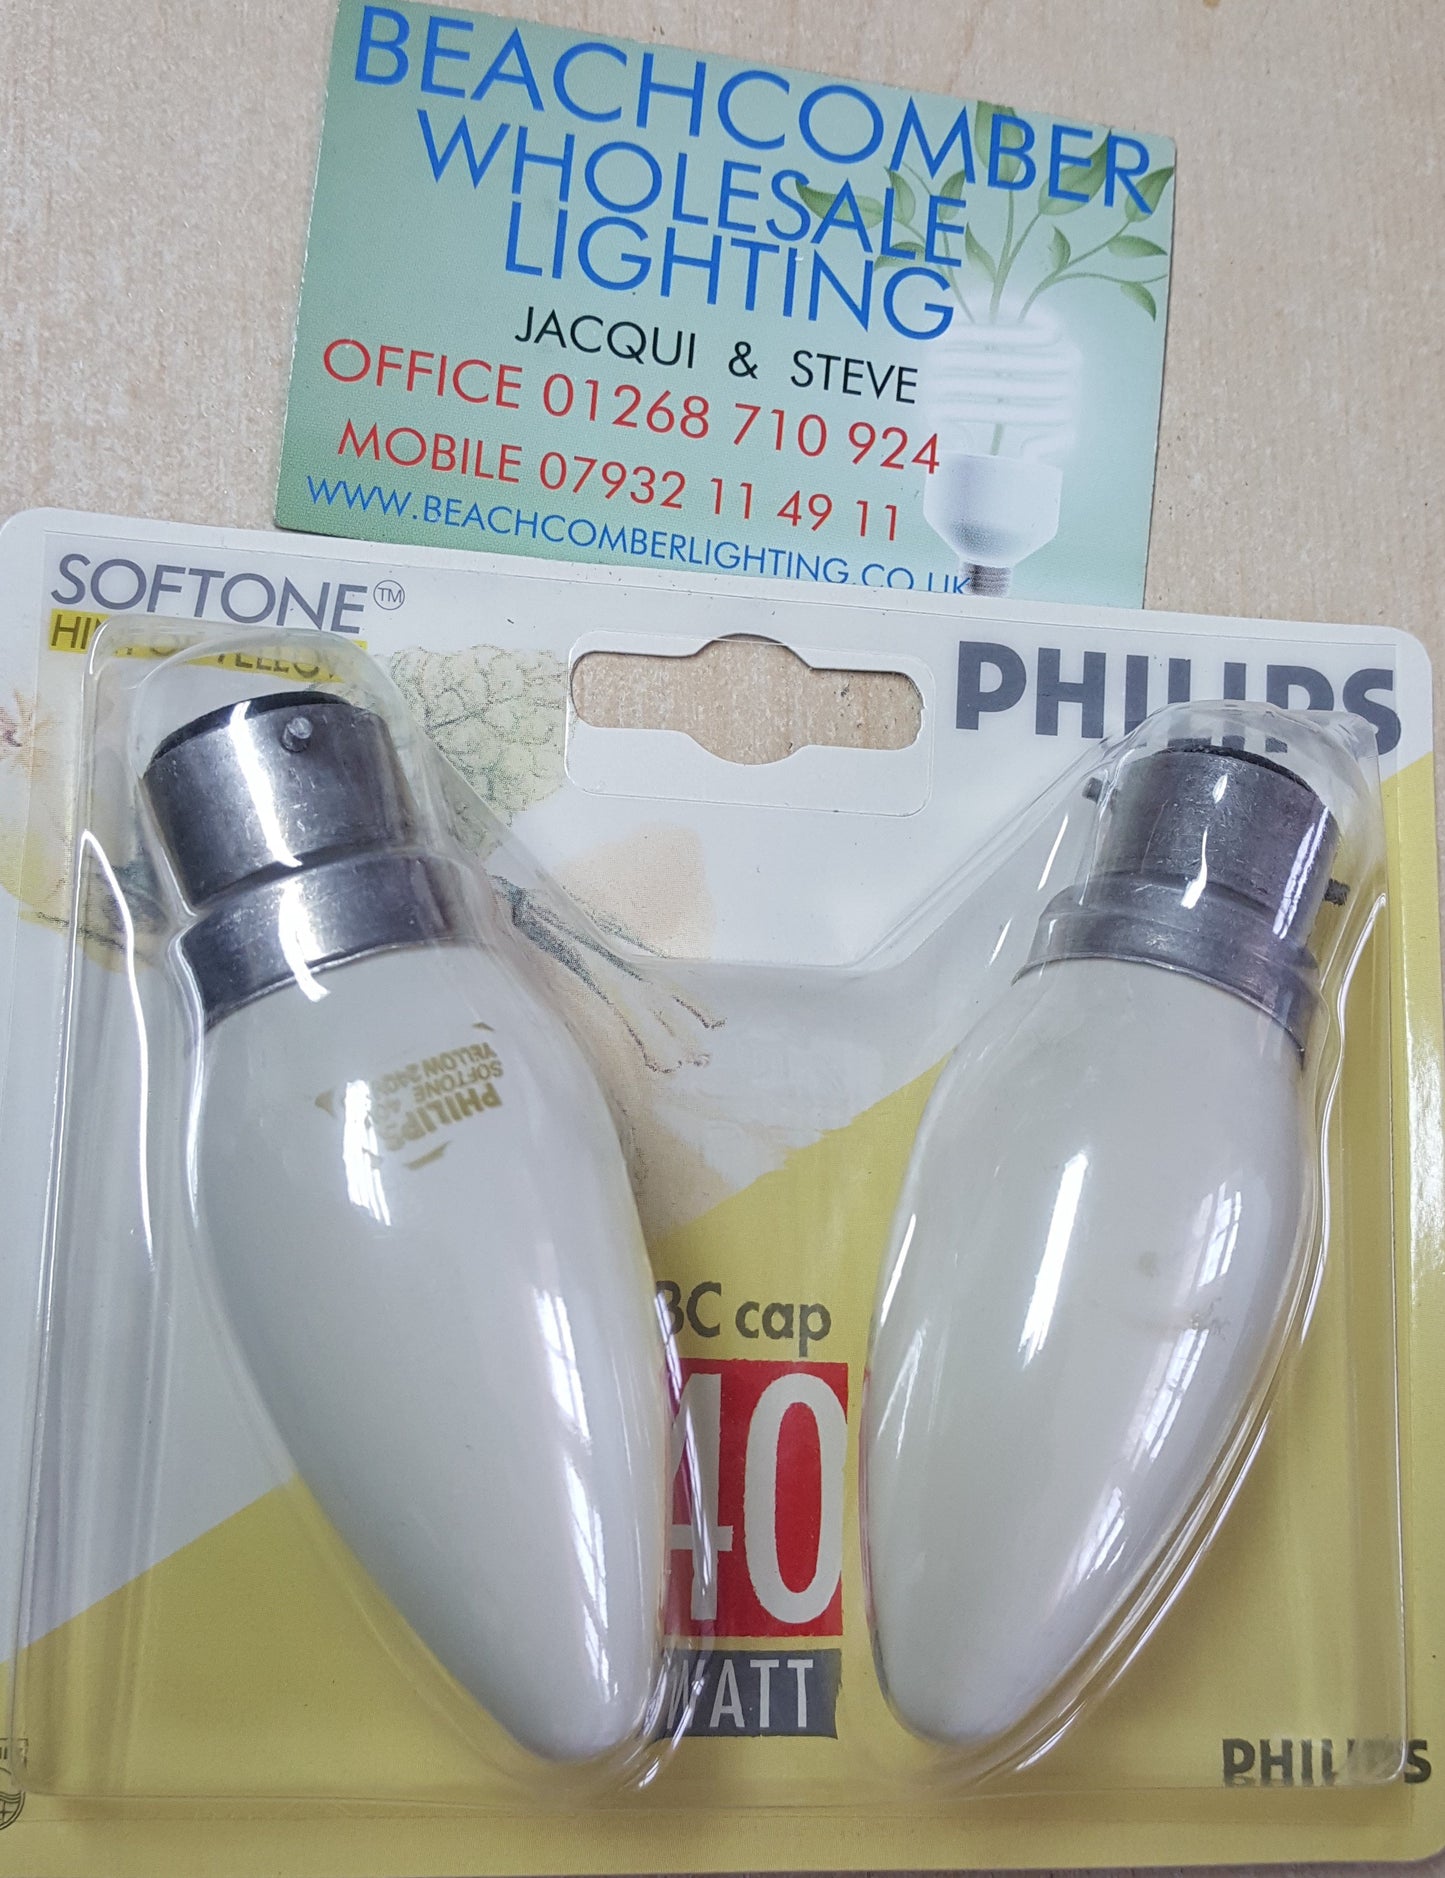 Phillips Candle 40W BC/B22 Softone Hint of Yellow Twin Pack - Beachcomber Lighting